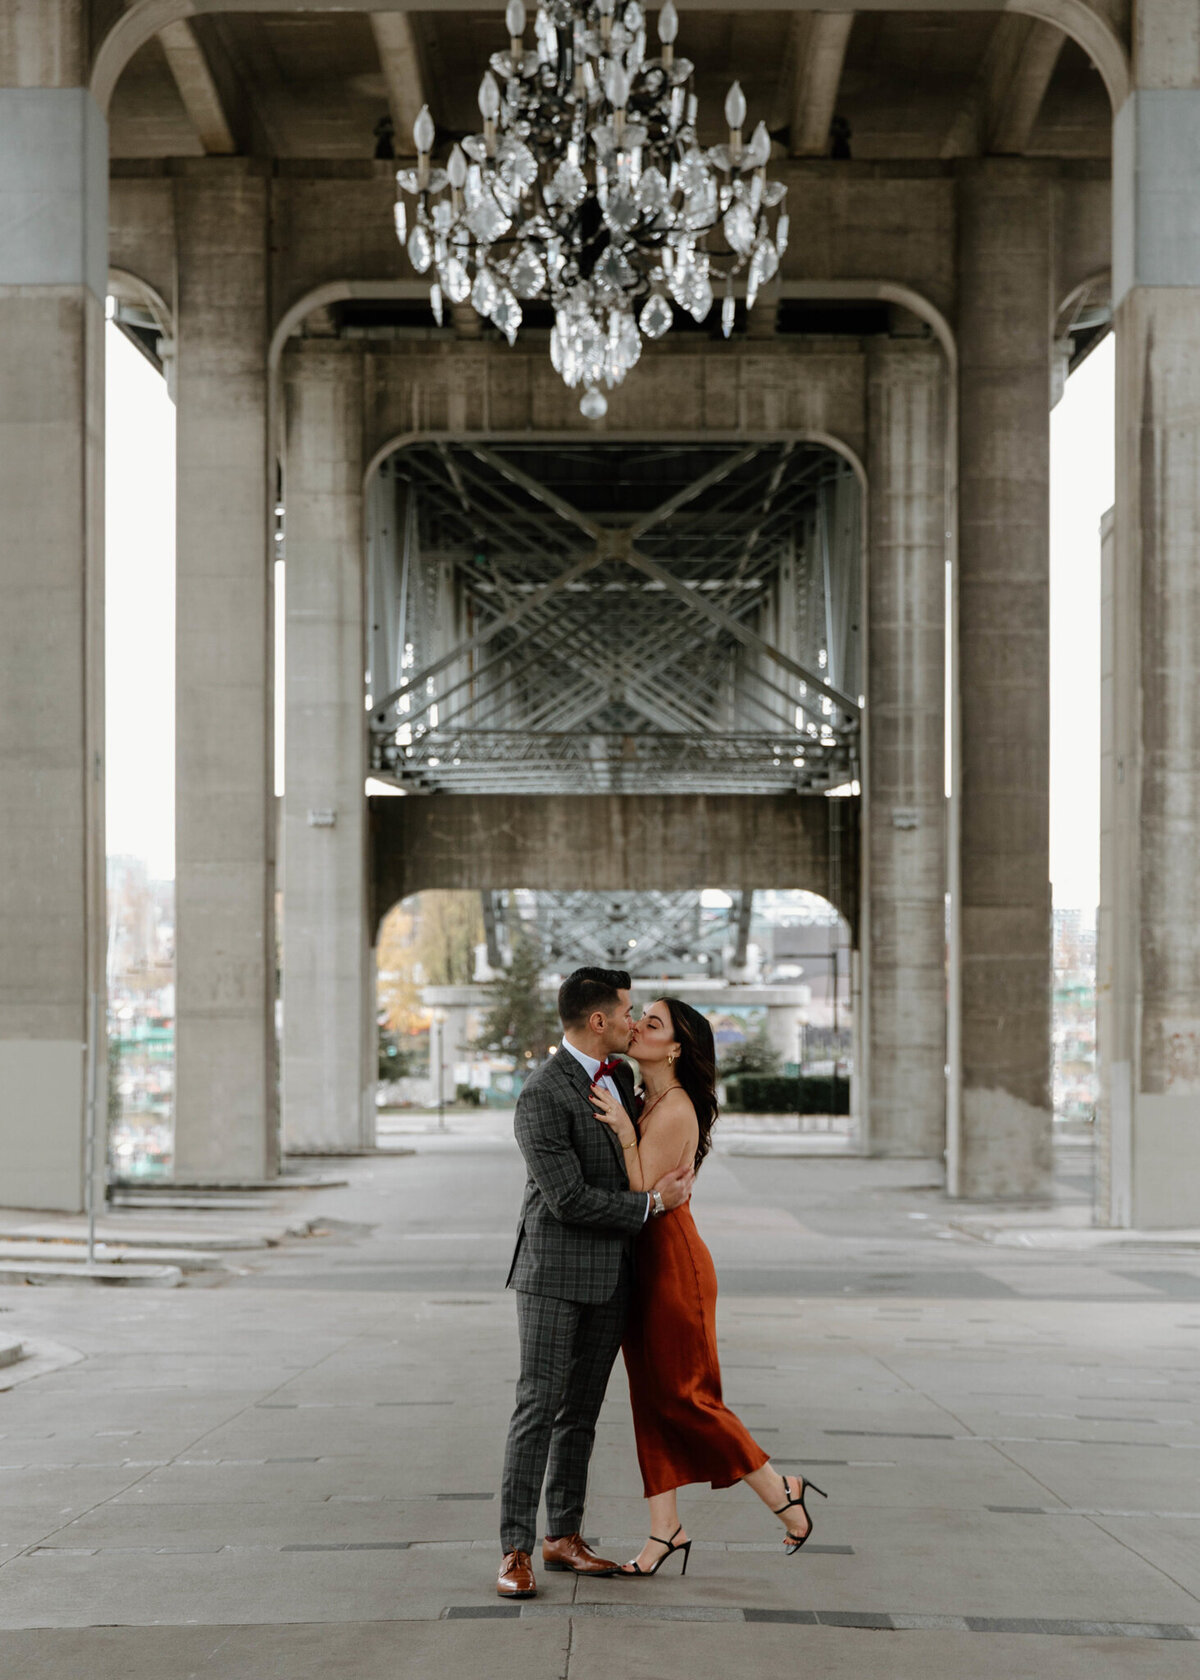 Stunning couple kissing under cement archway and crystal chandelier by Stunning bride and groom on beach, capture by Bronte Taylor Photography, is a Vancouver based photographer with a playful, genuine and intimate approach.